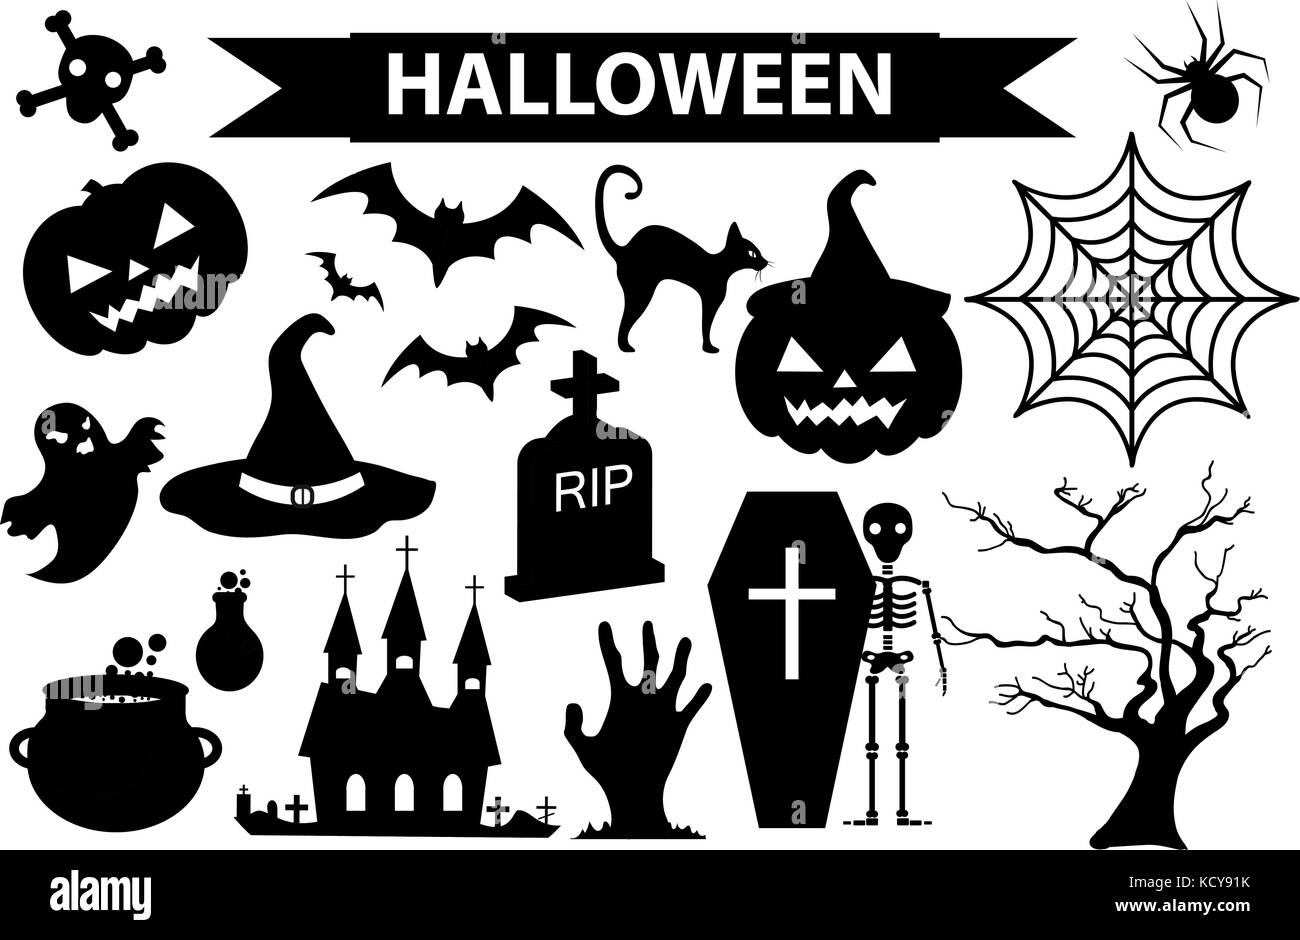 Happy Halloween icons set, black silhouette style. Isolated on white background. Halloween collection of design elements with pumpkin, spider, zombie, skull, coffin, bat. Vector illustration. Stock Vector